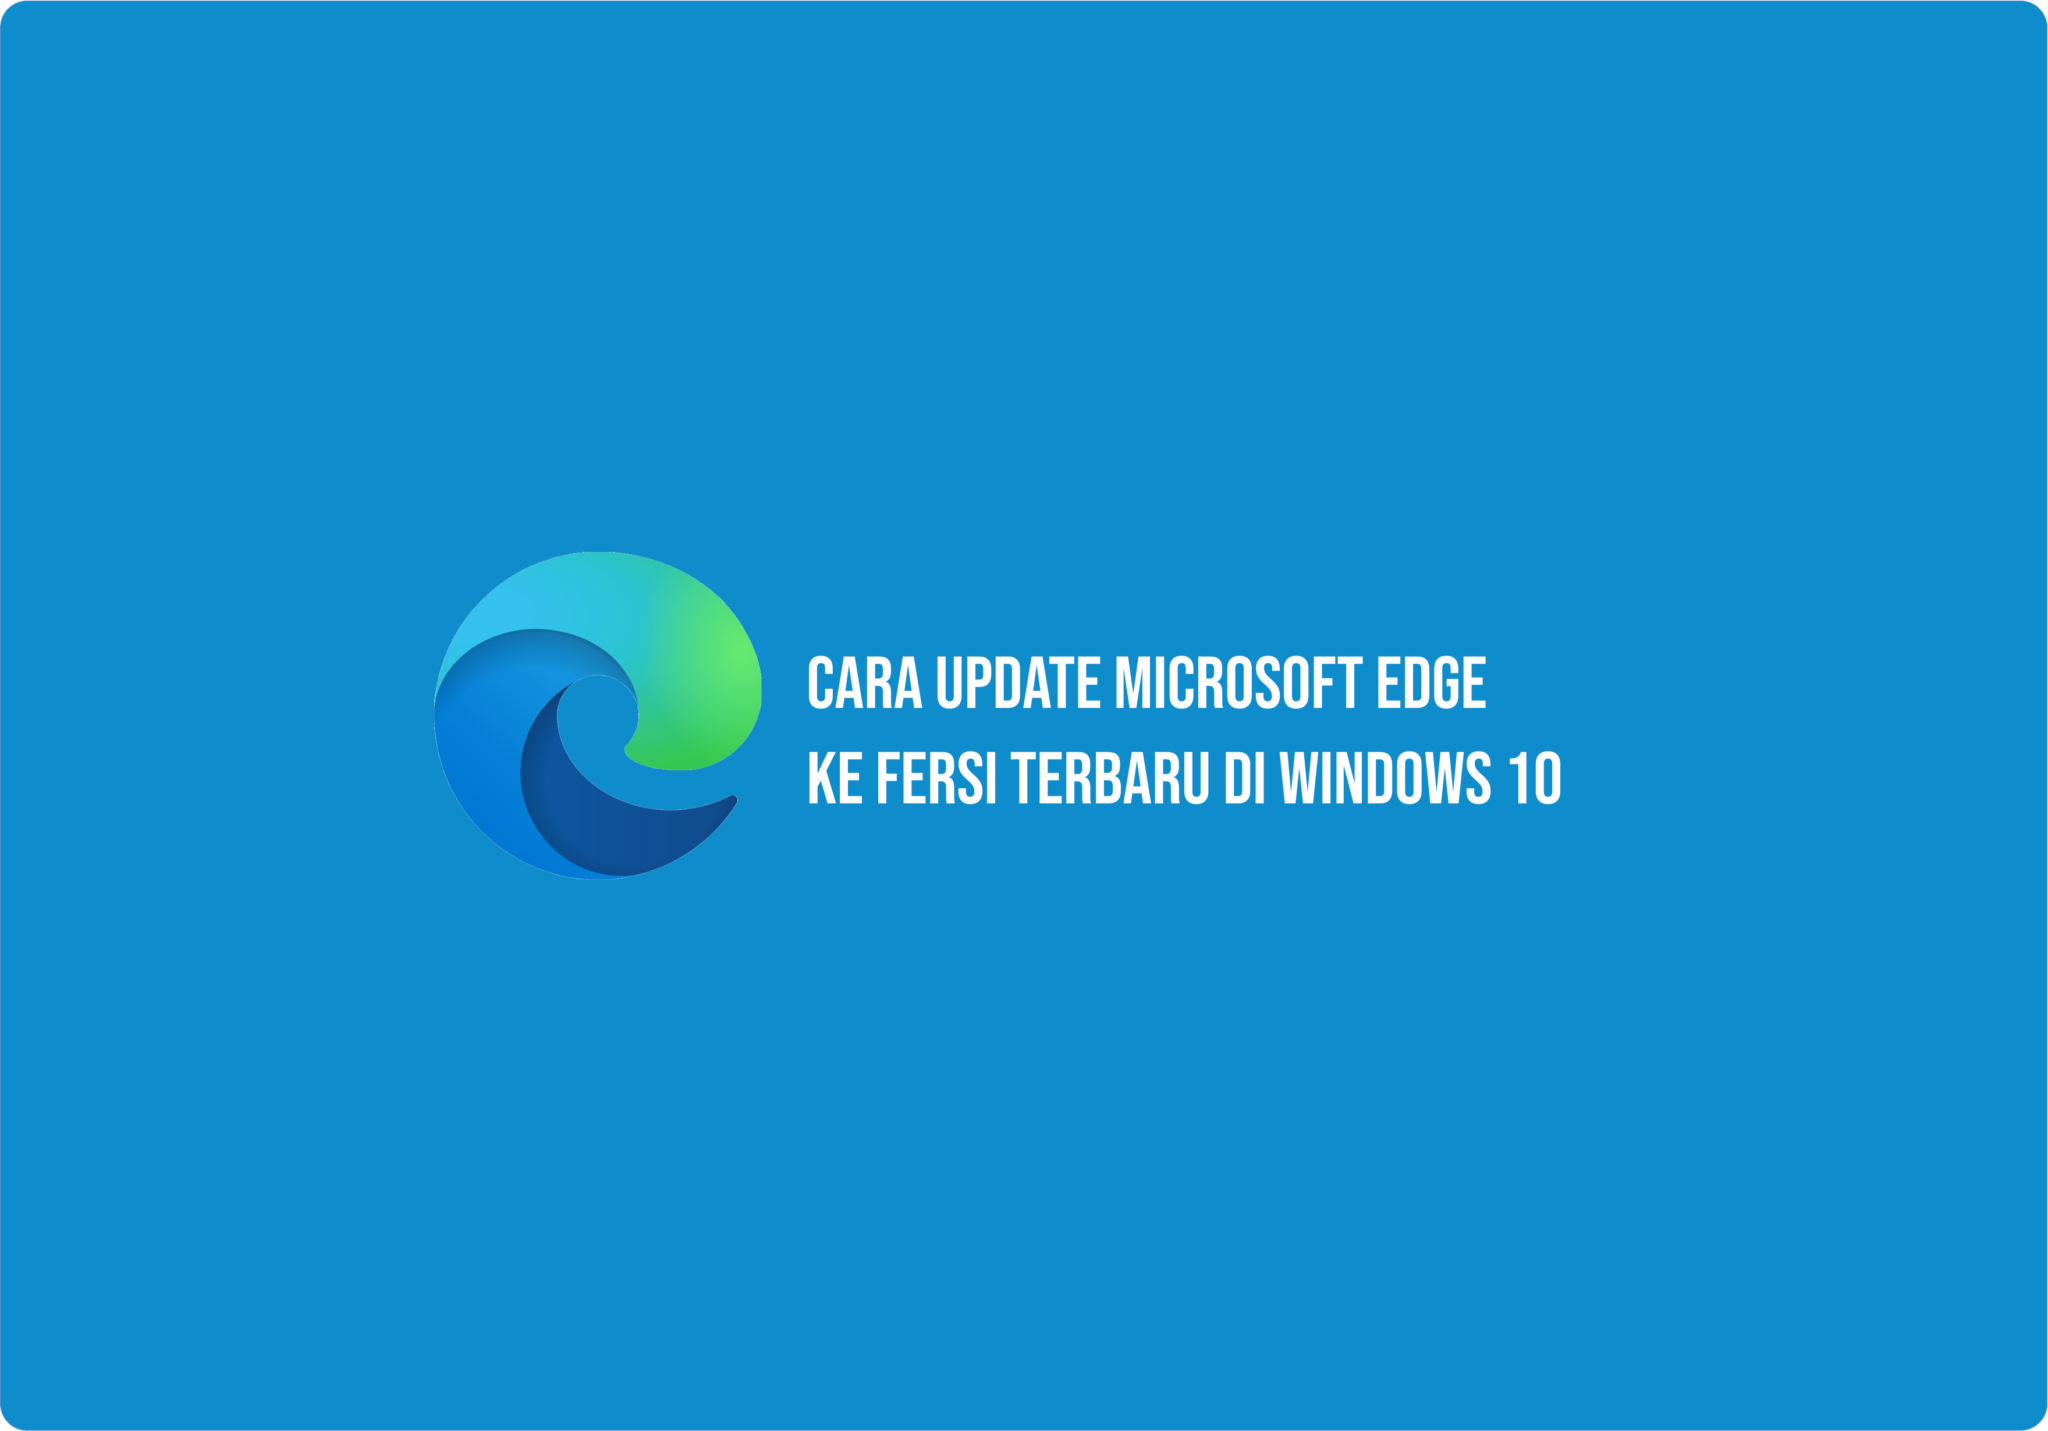 download the new for ios Microsoft Edge Stable 119.0.2151.72